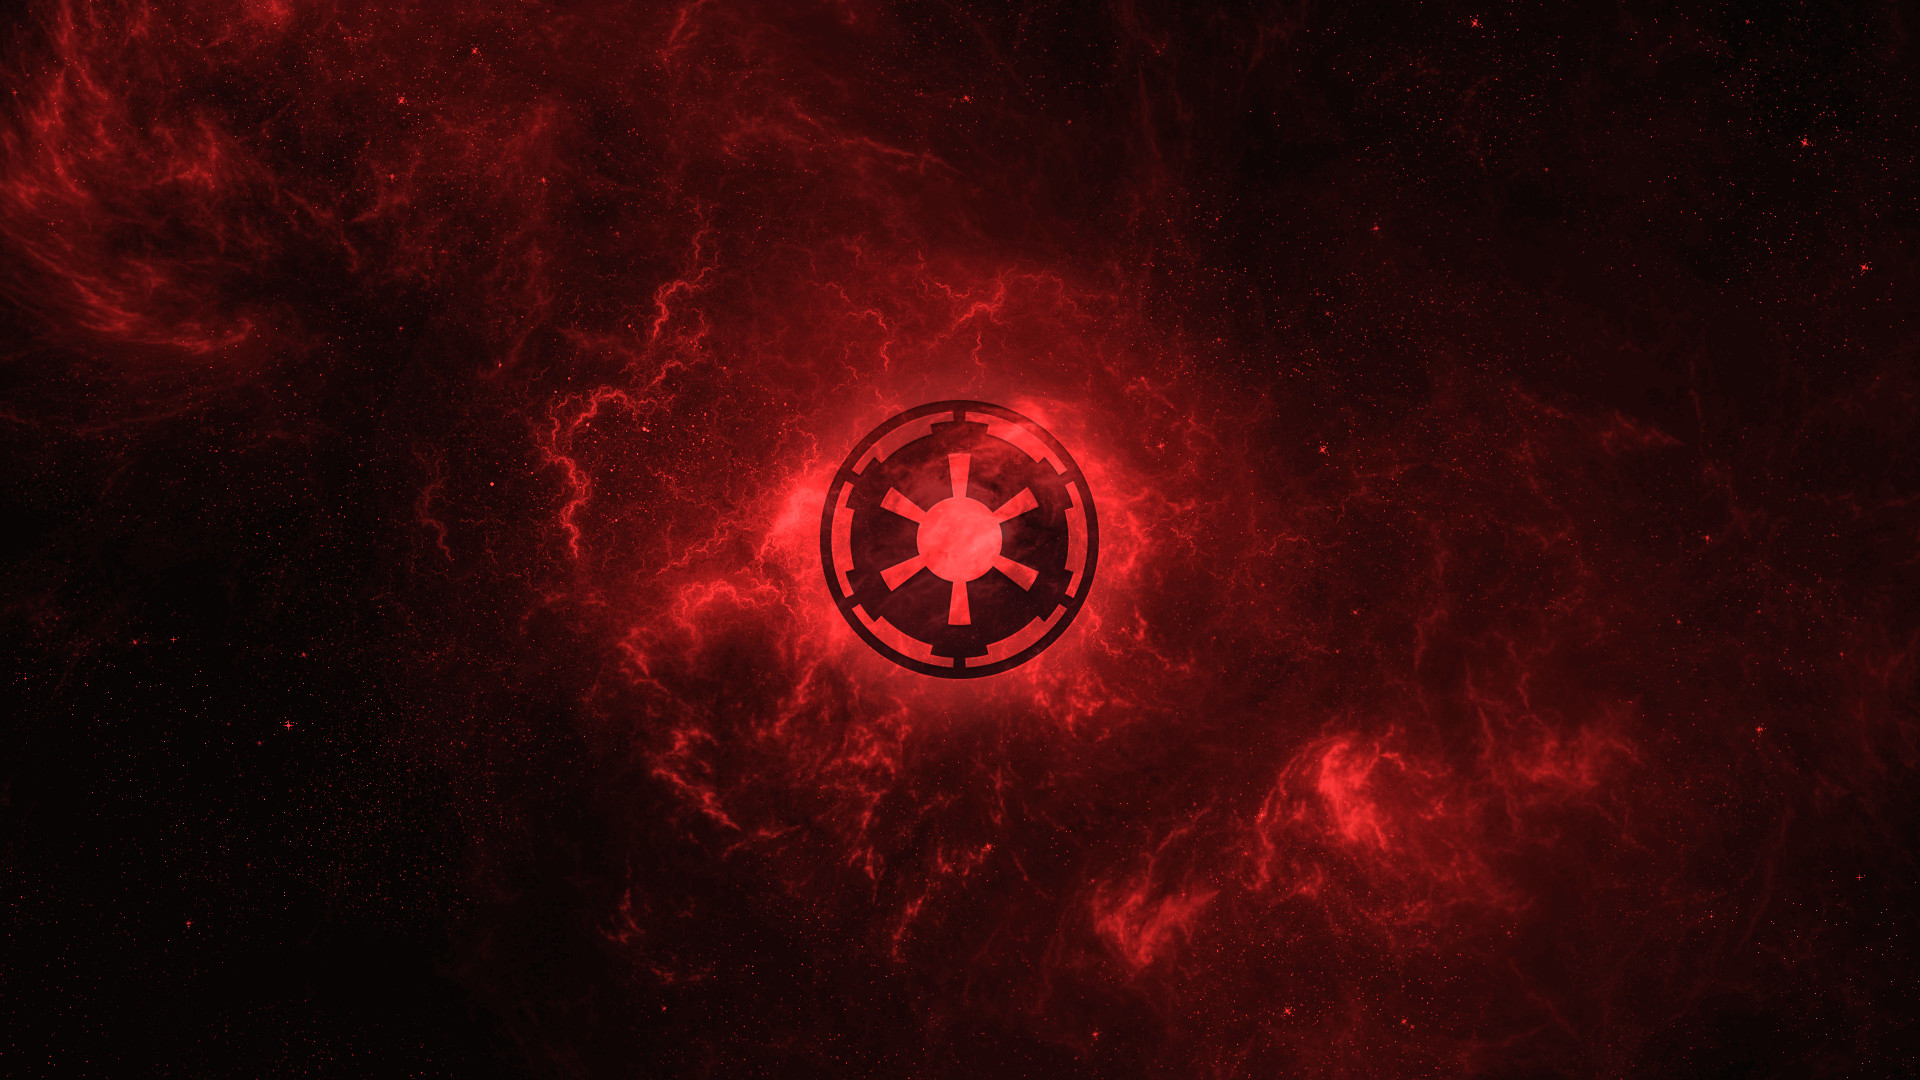 1920x1080 sith wallpaper 1080p Star Wars Sith Empire Wallpapers High Quality  Resolution Â» Cinema Wallpaper 1080p